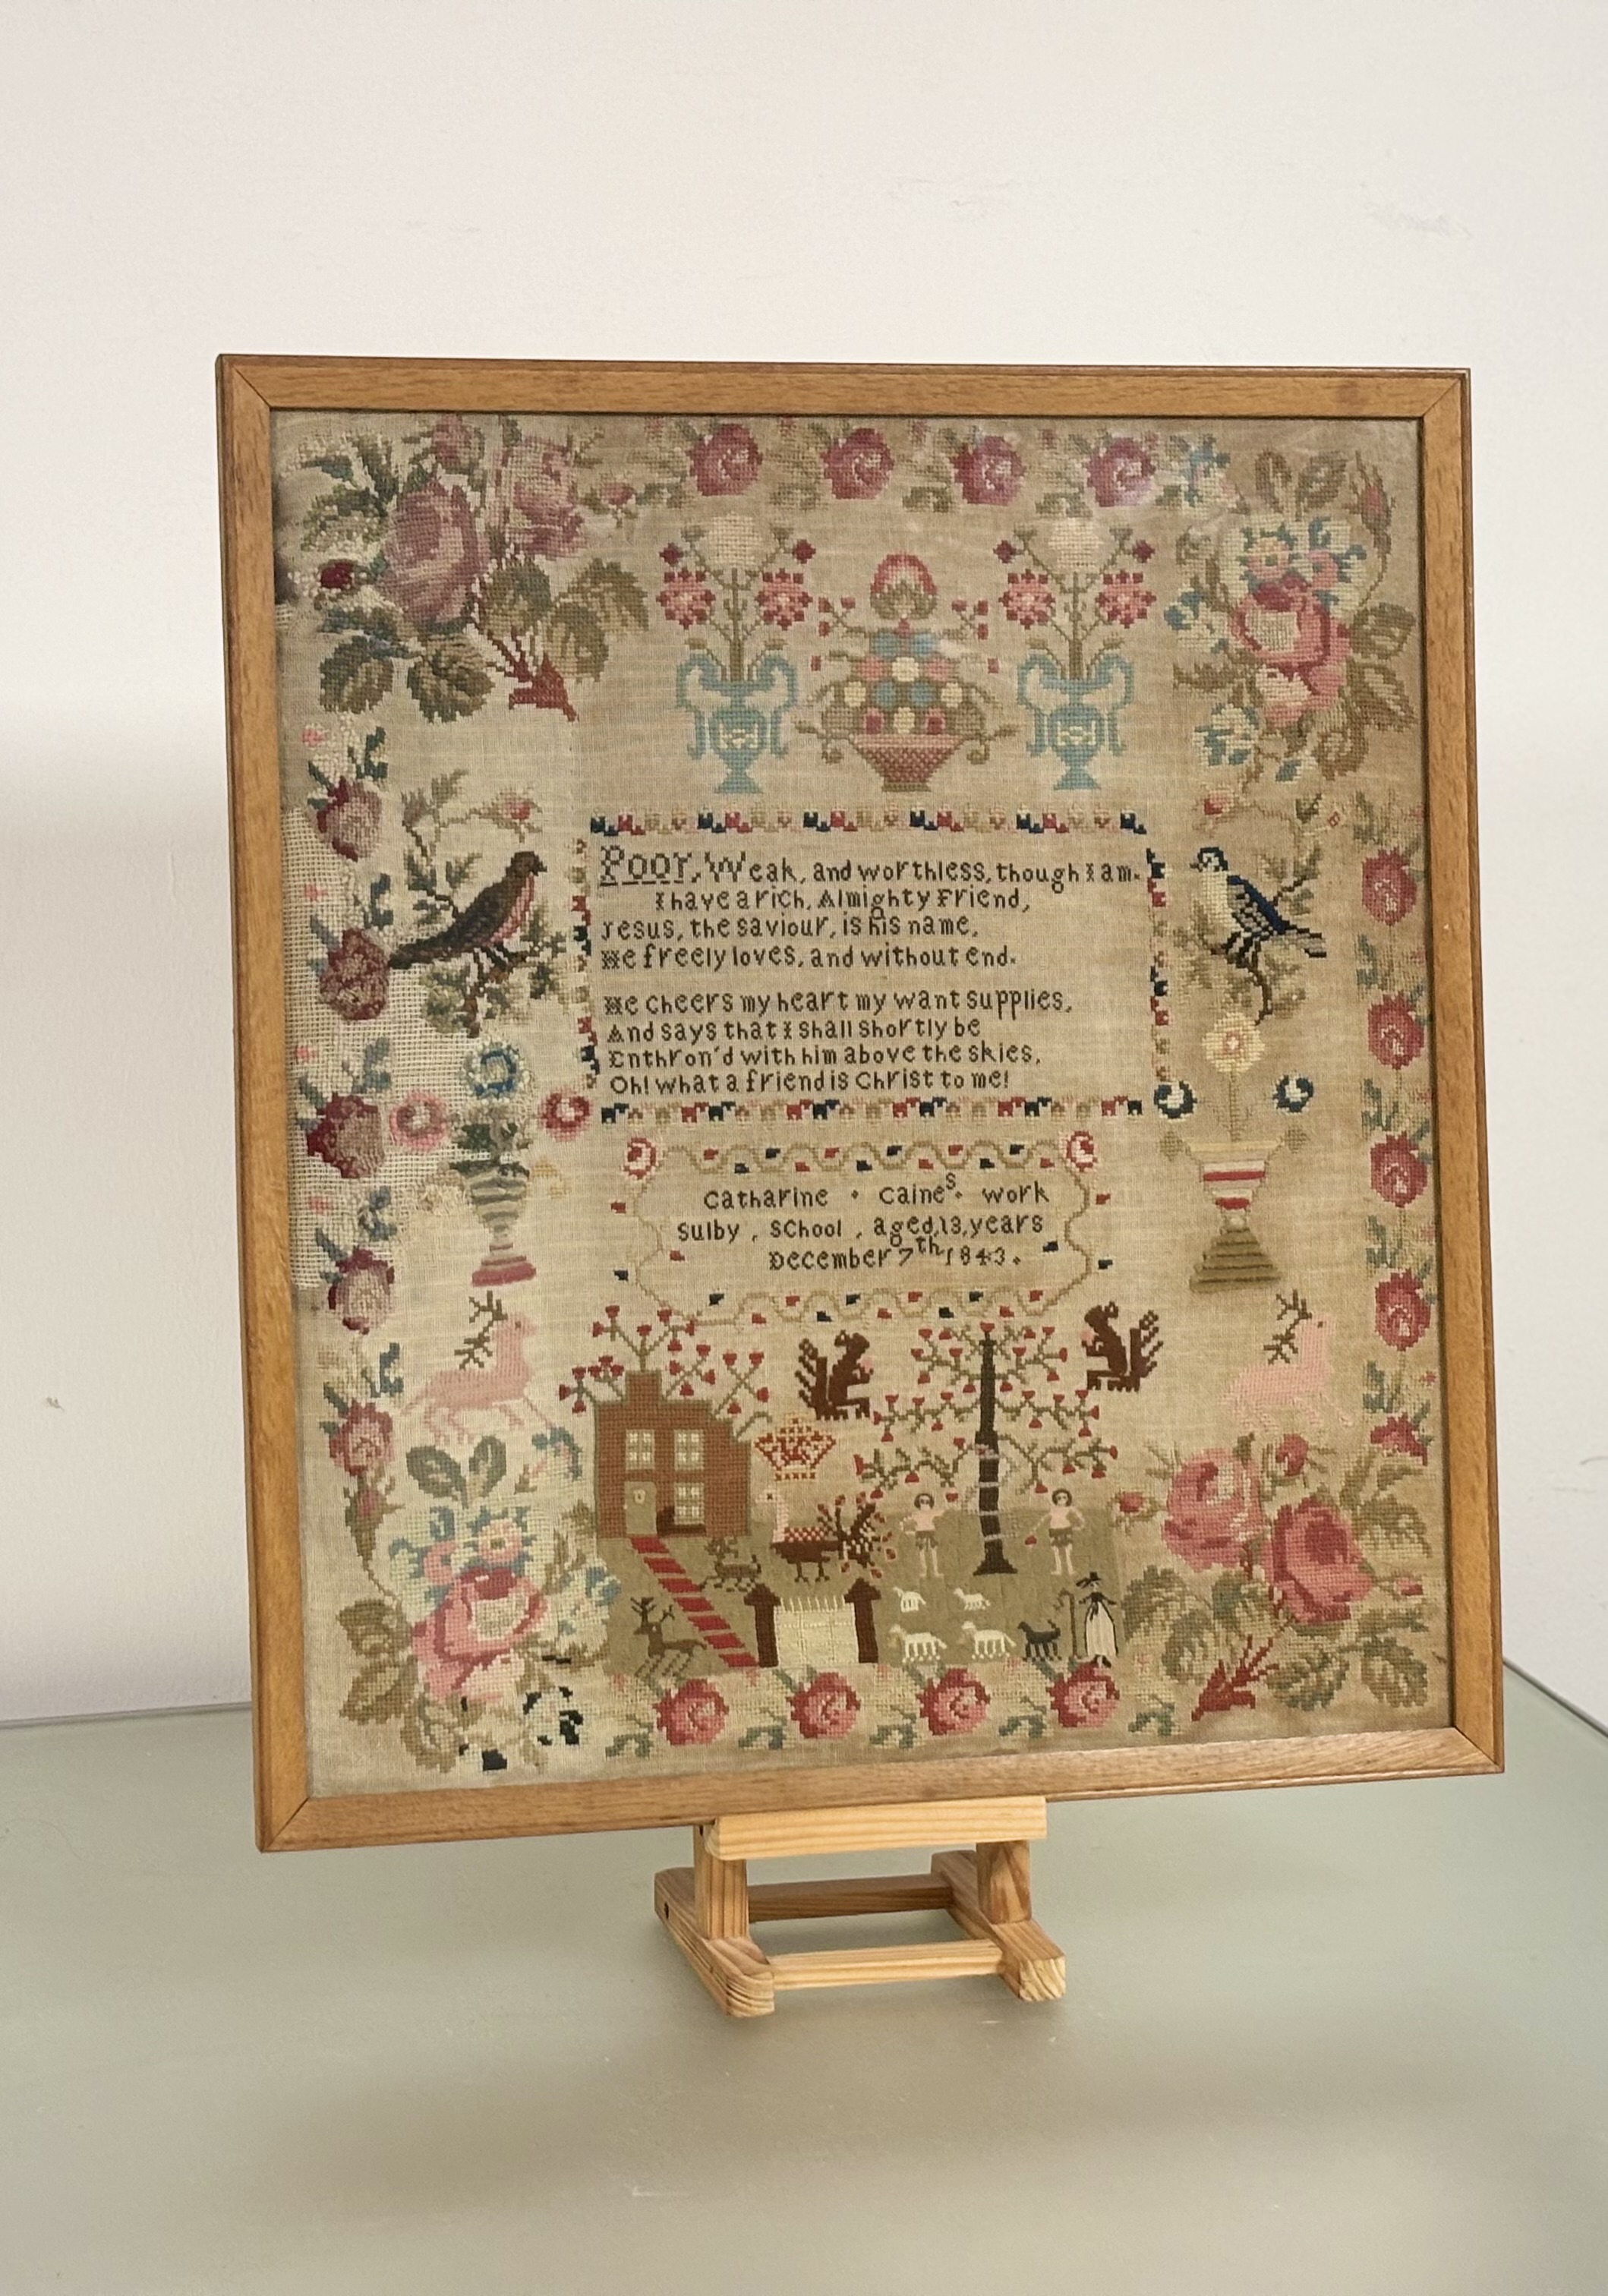 A large early Victorian needlework sampler, Catherine Caine, Sulby School, Aged 13 years, December